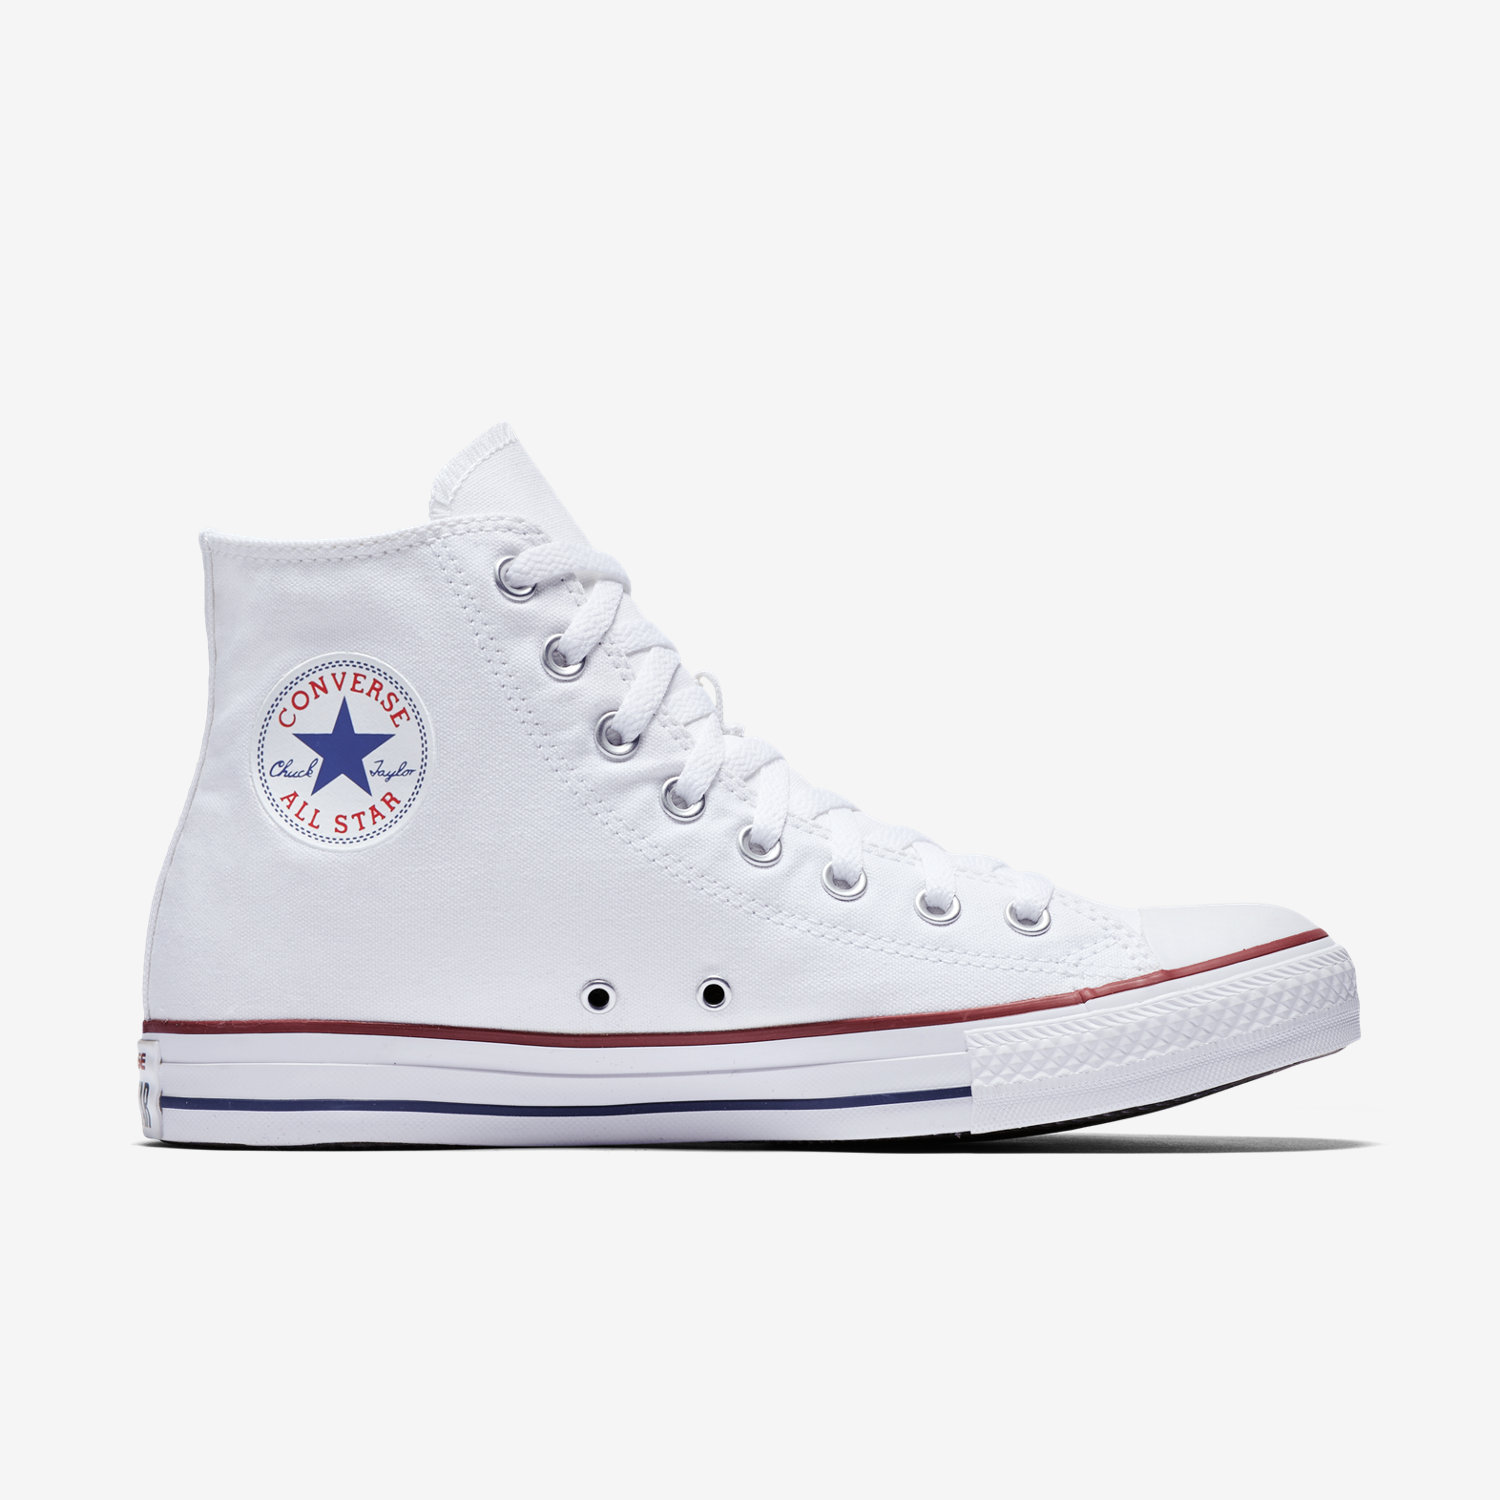 NEW CONVERSE WHITE SNEAKERS HIGH TOP 